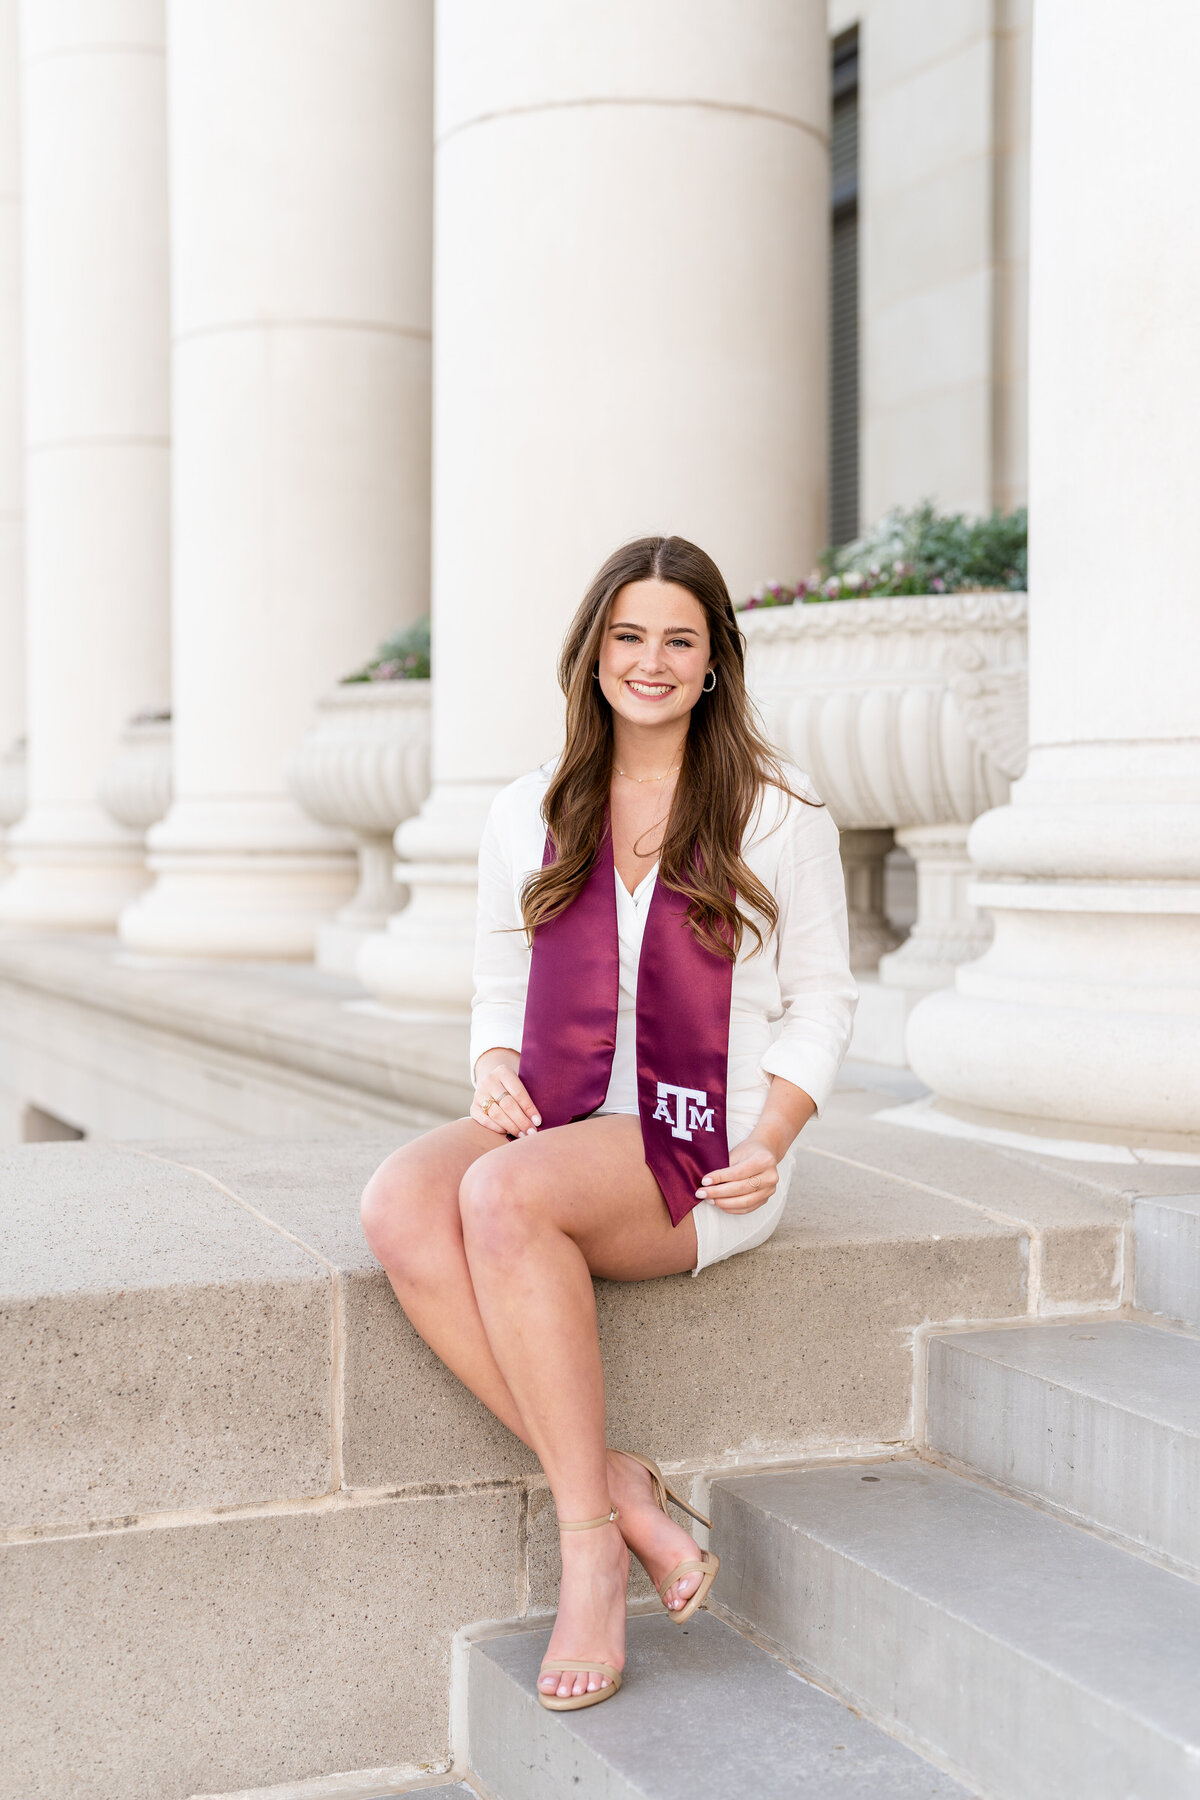 Texas A&M senior girl sitting on Administration Building stairs while smiling and holding stole and wearing white dress